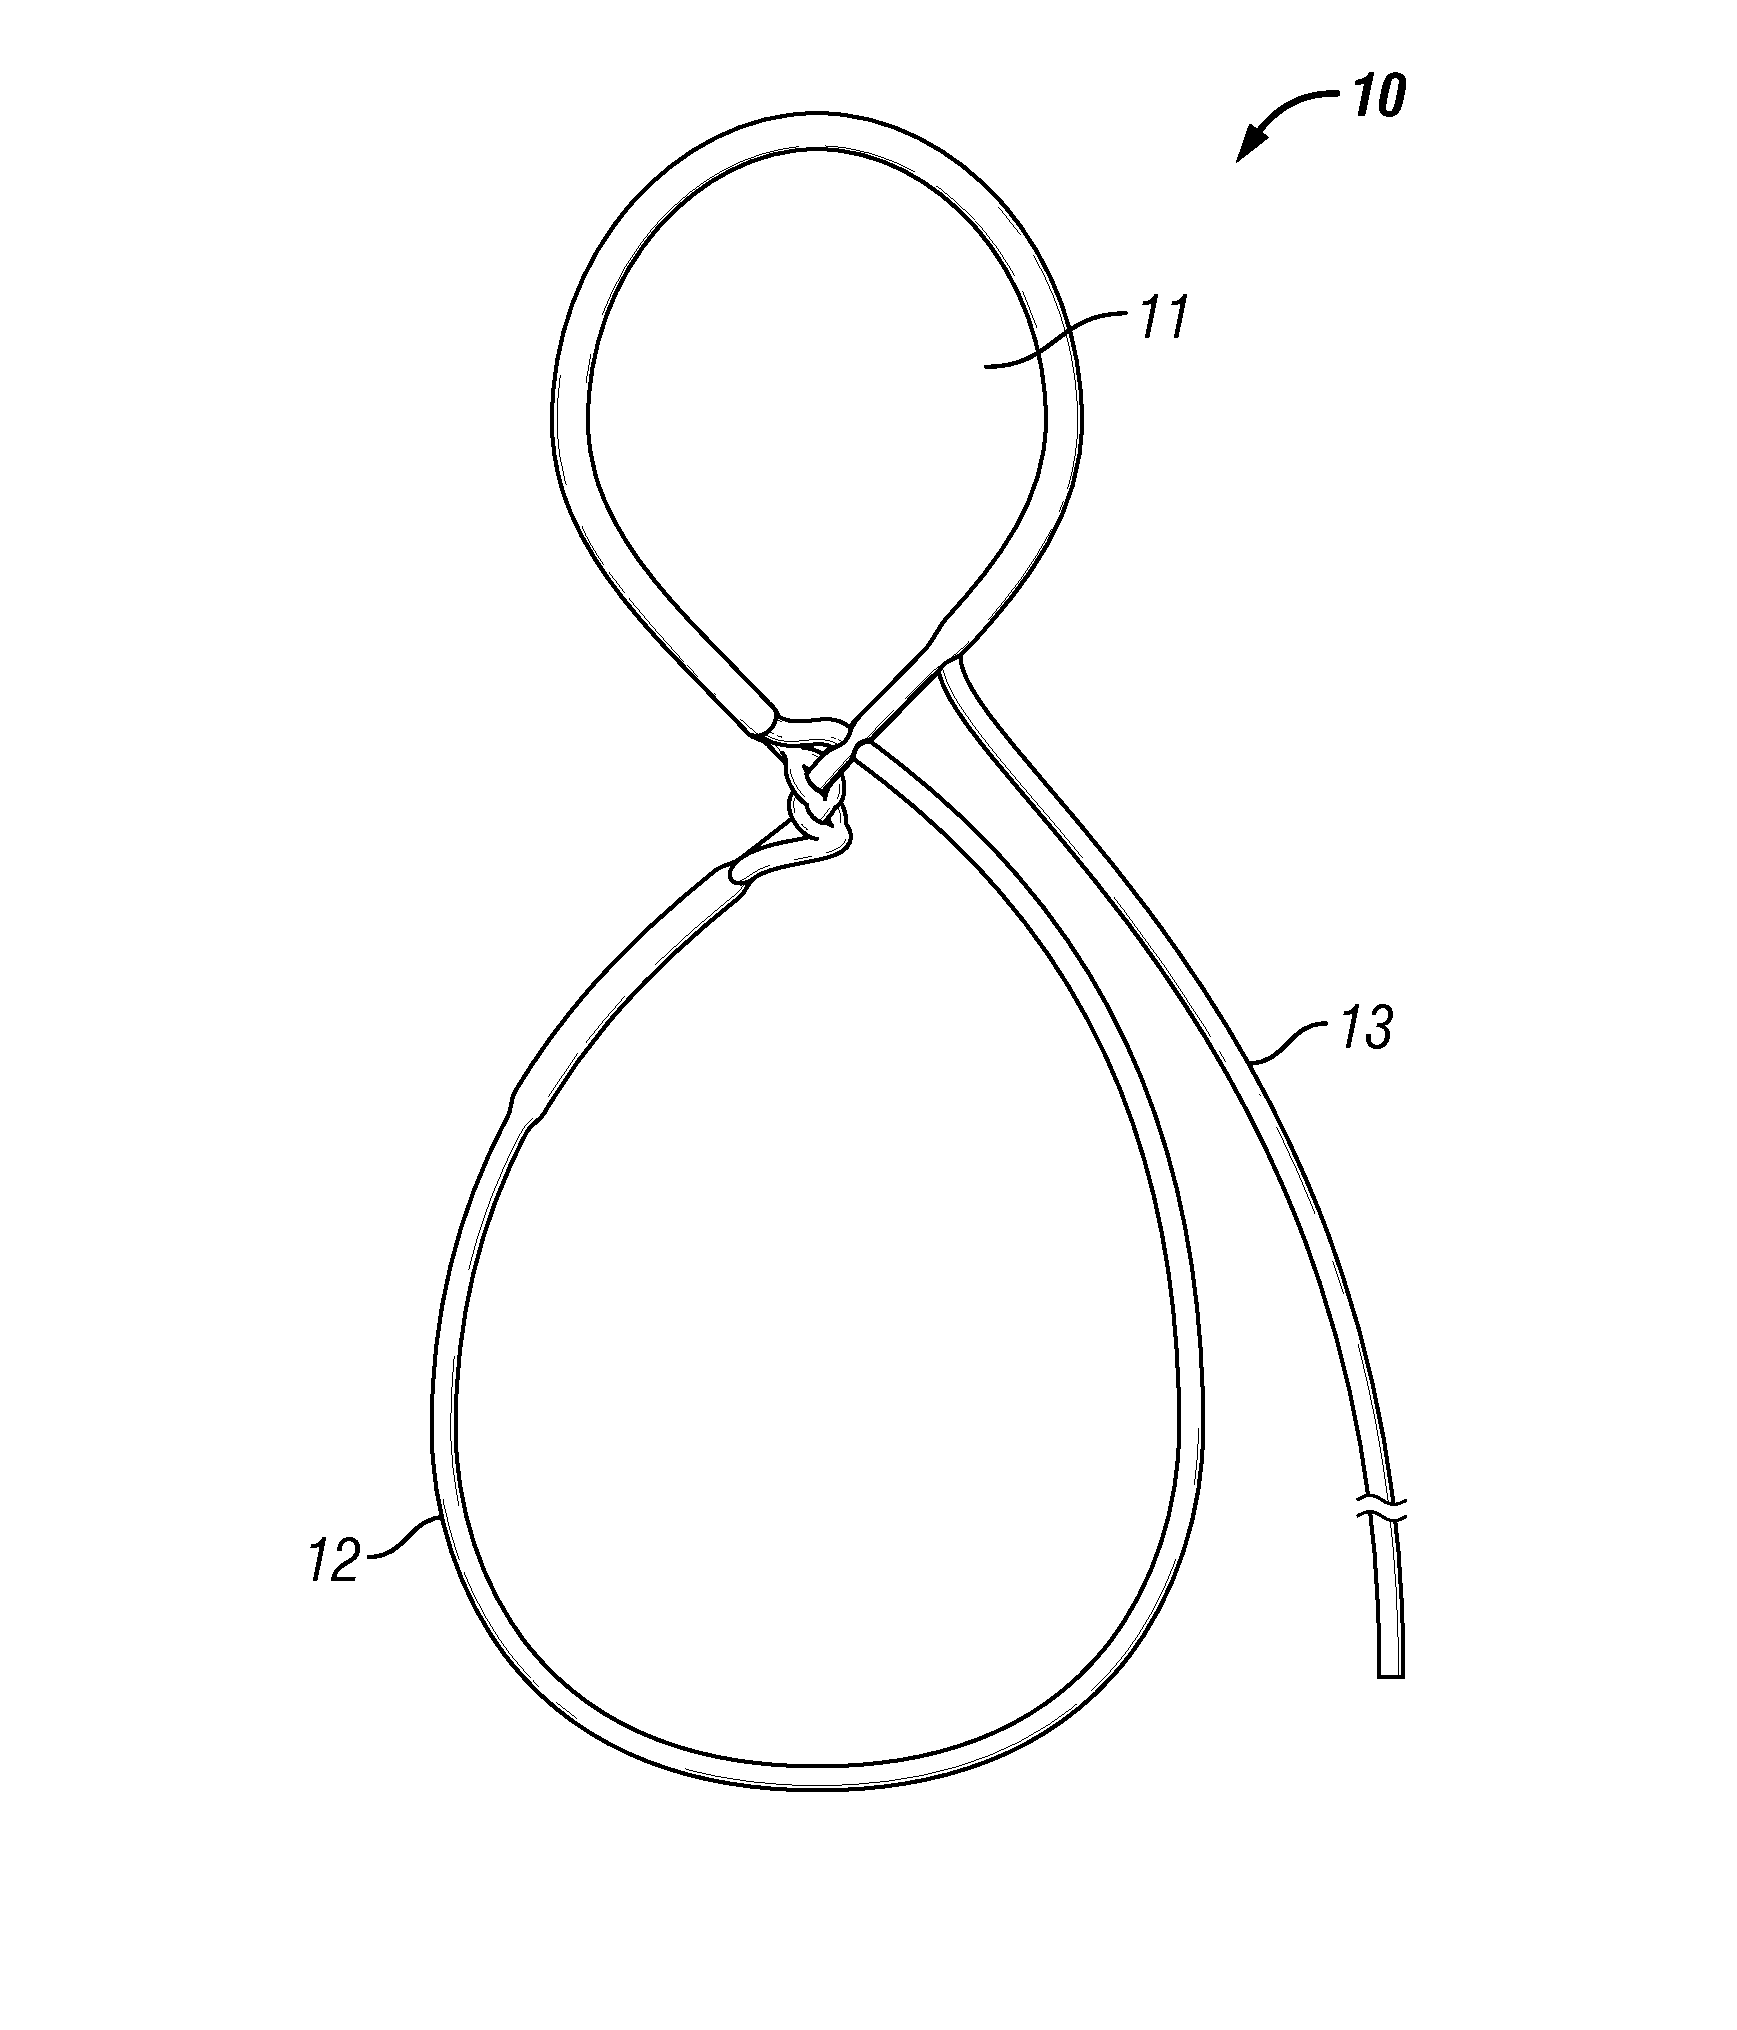 Adjustable continuous filament structure and method of manufacture and use